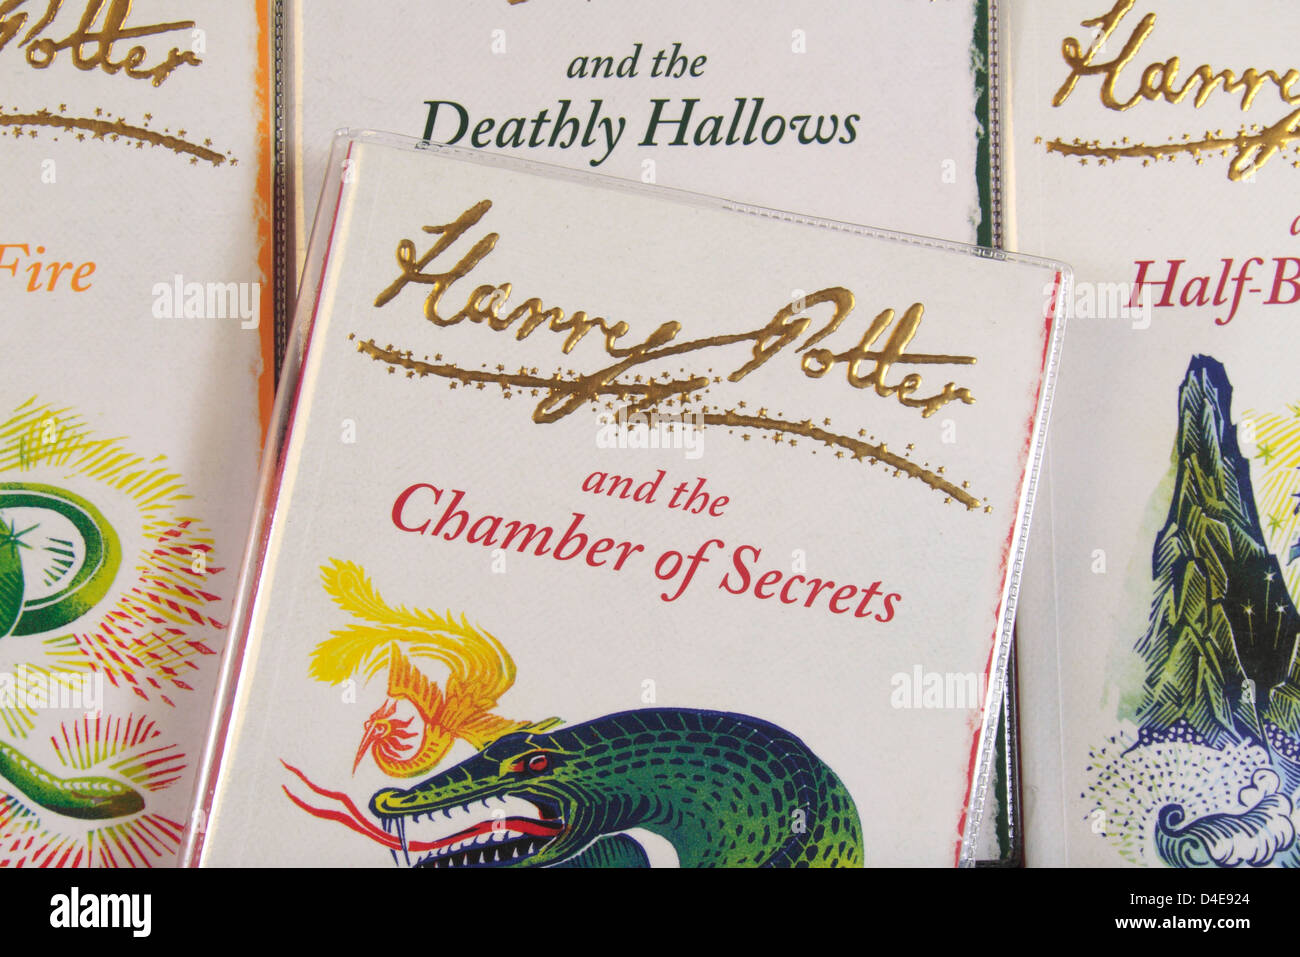 The book cover of "Harry Potter and the Chamber of Secrets" by JK Rowling sitting on other books in the series. Stock Photo